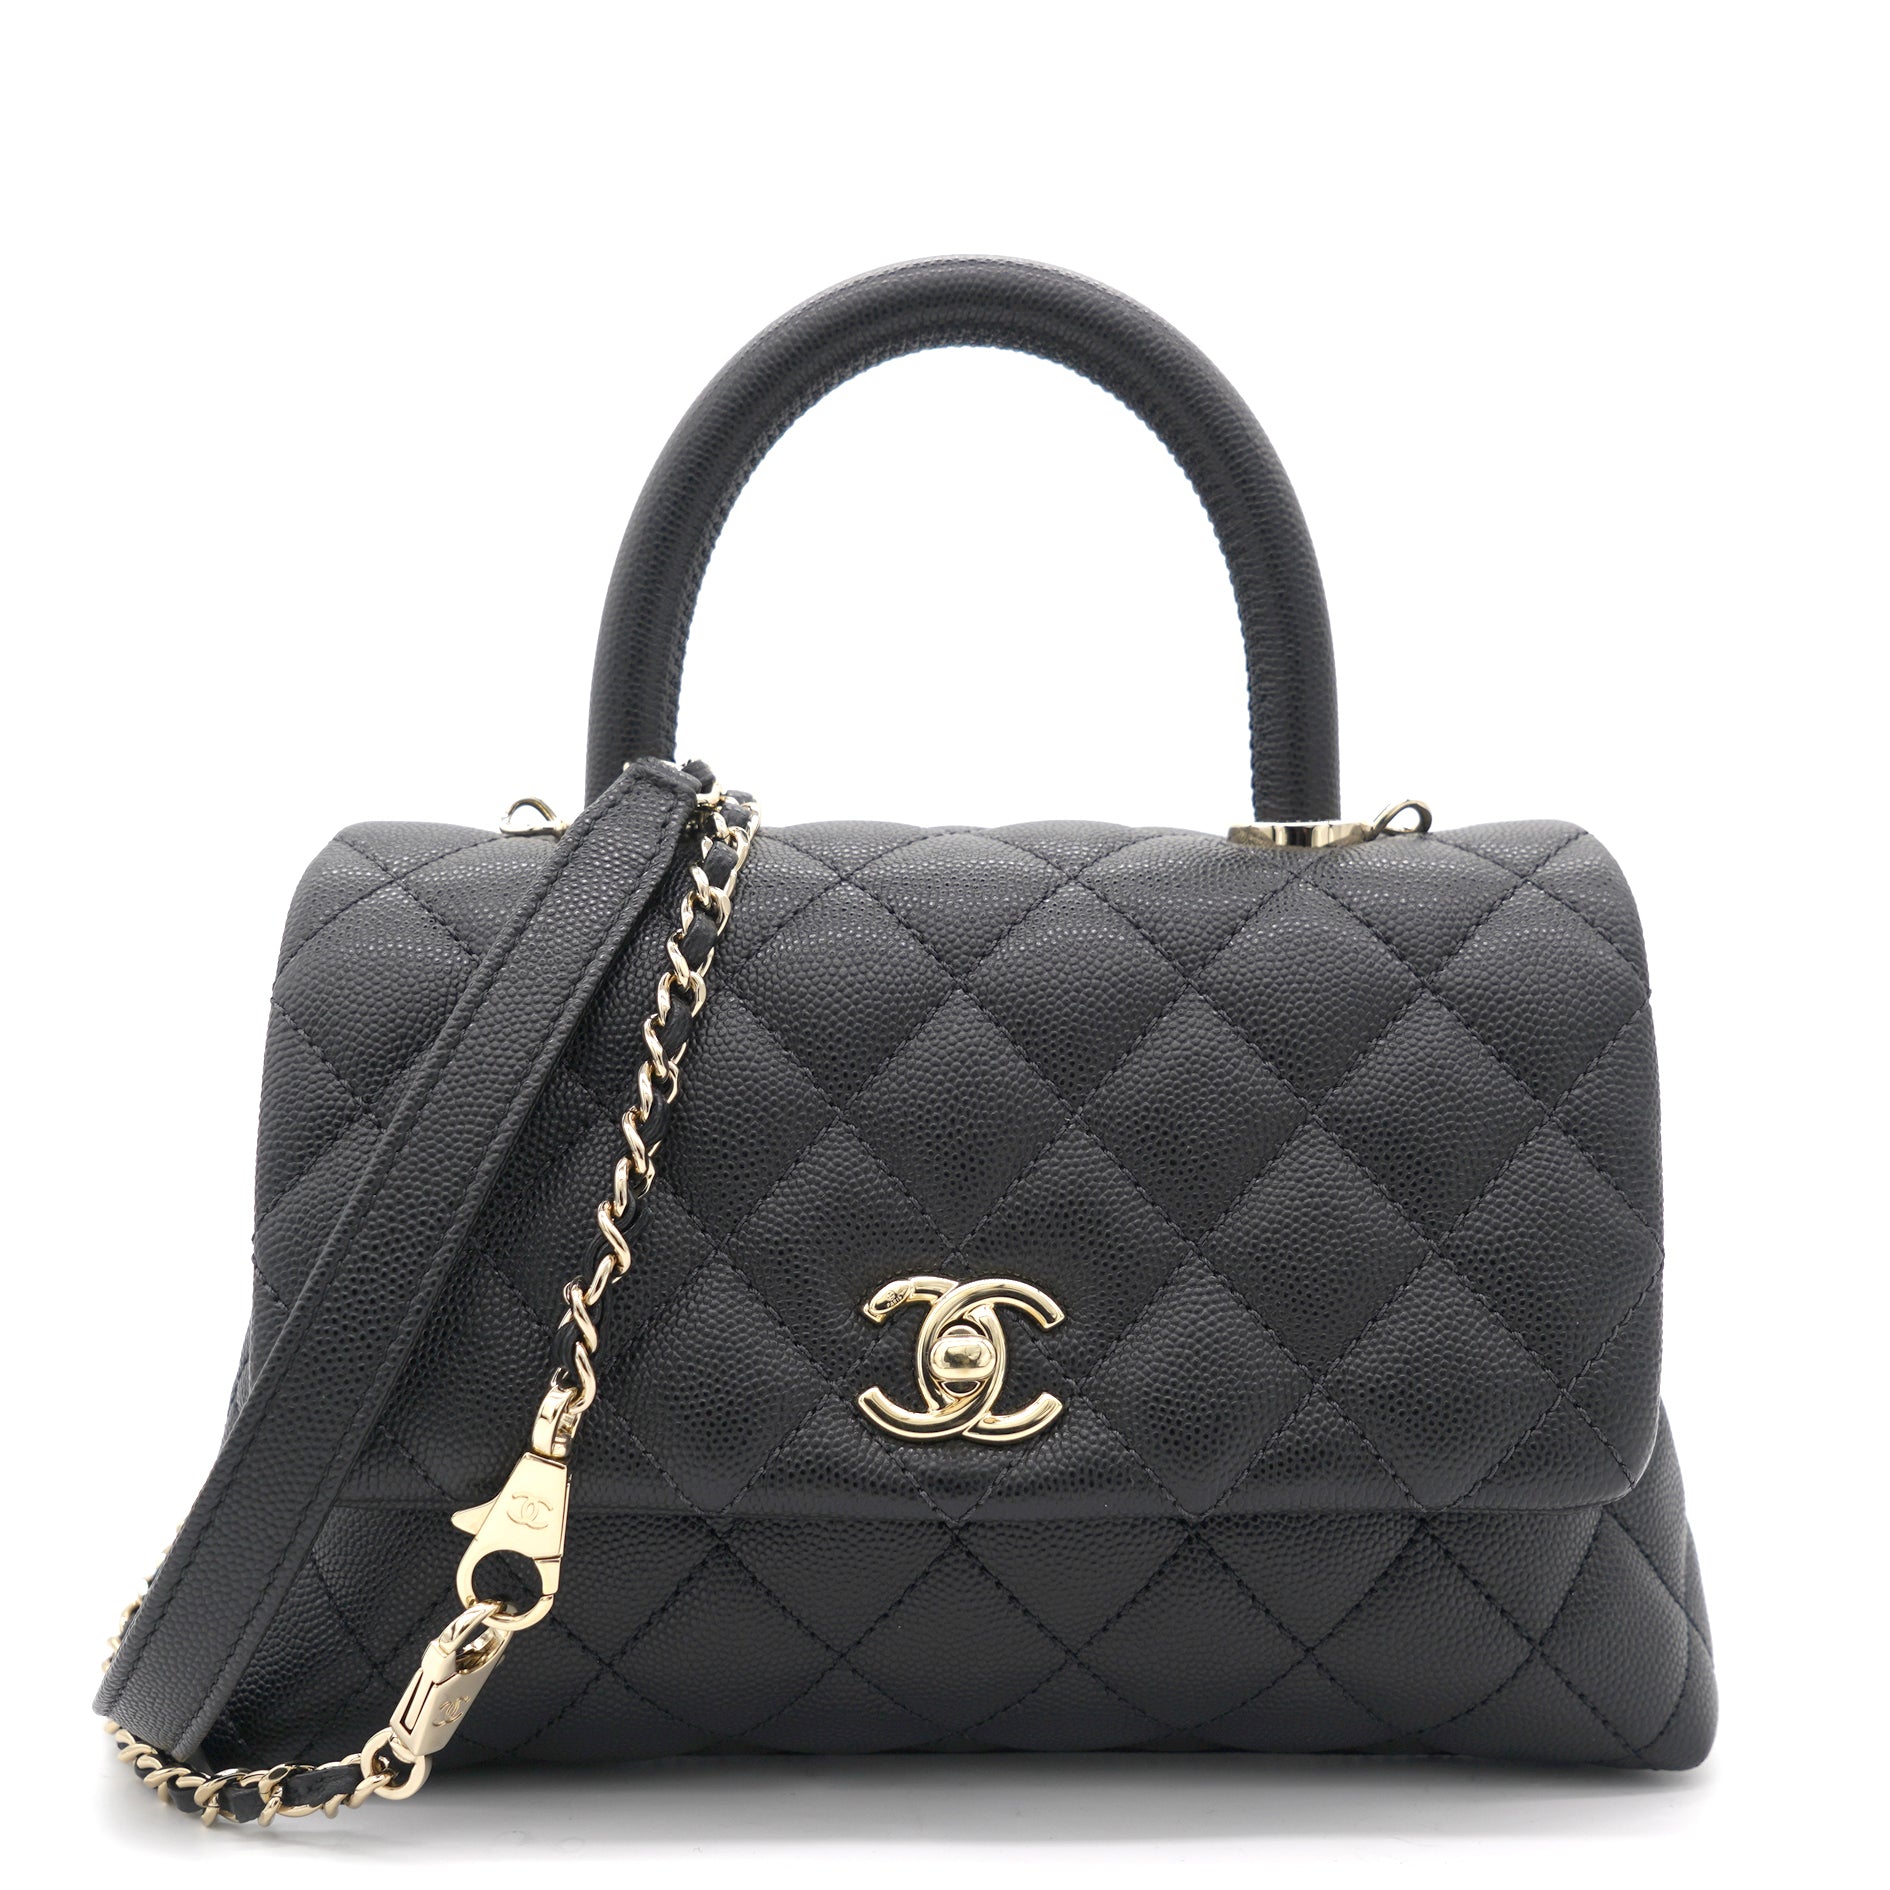 Chanel Black Quilted Caviar Leather Mini Coco Top Handle Bag Chanel